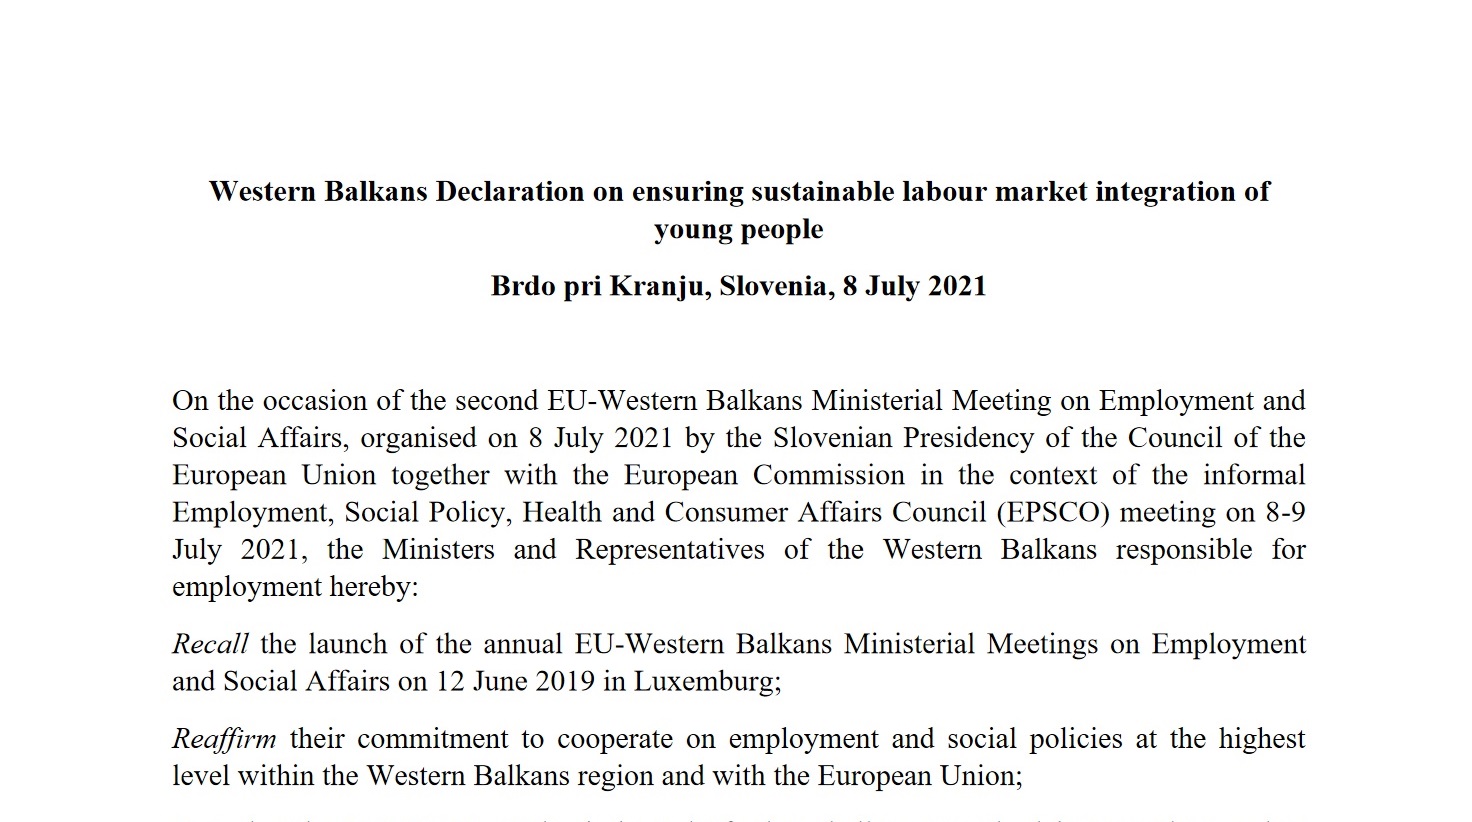 Western Balkans Declaration on ensuring sustainable labour market integration of young people